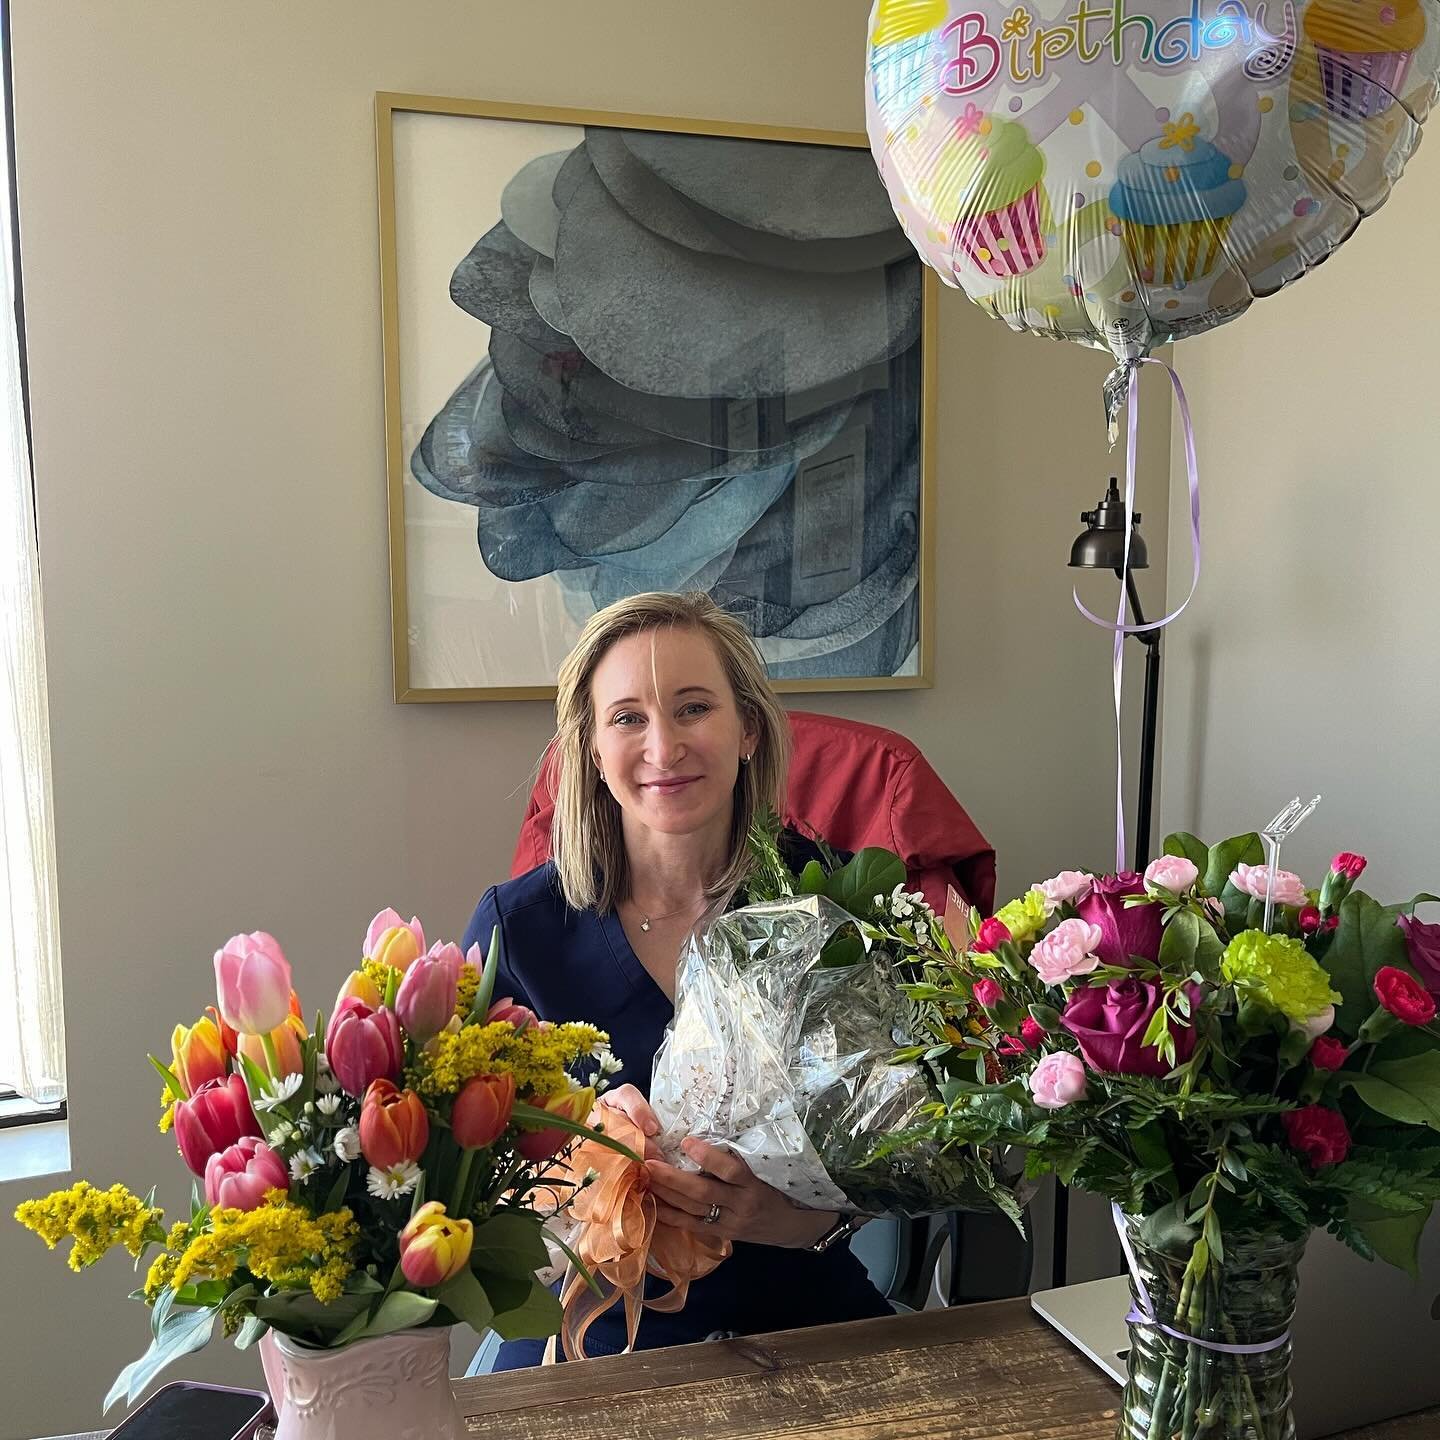 Happy Birthday Dr. Tokarz!
We wish you a day filled with joy, laughter, and all the things that make you smile.  Celebrate You! 🎈🎁

#birthday
#birthdaywishes 
#tokarzdermatology